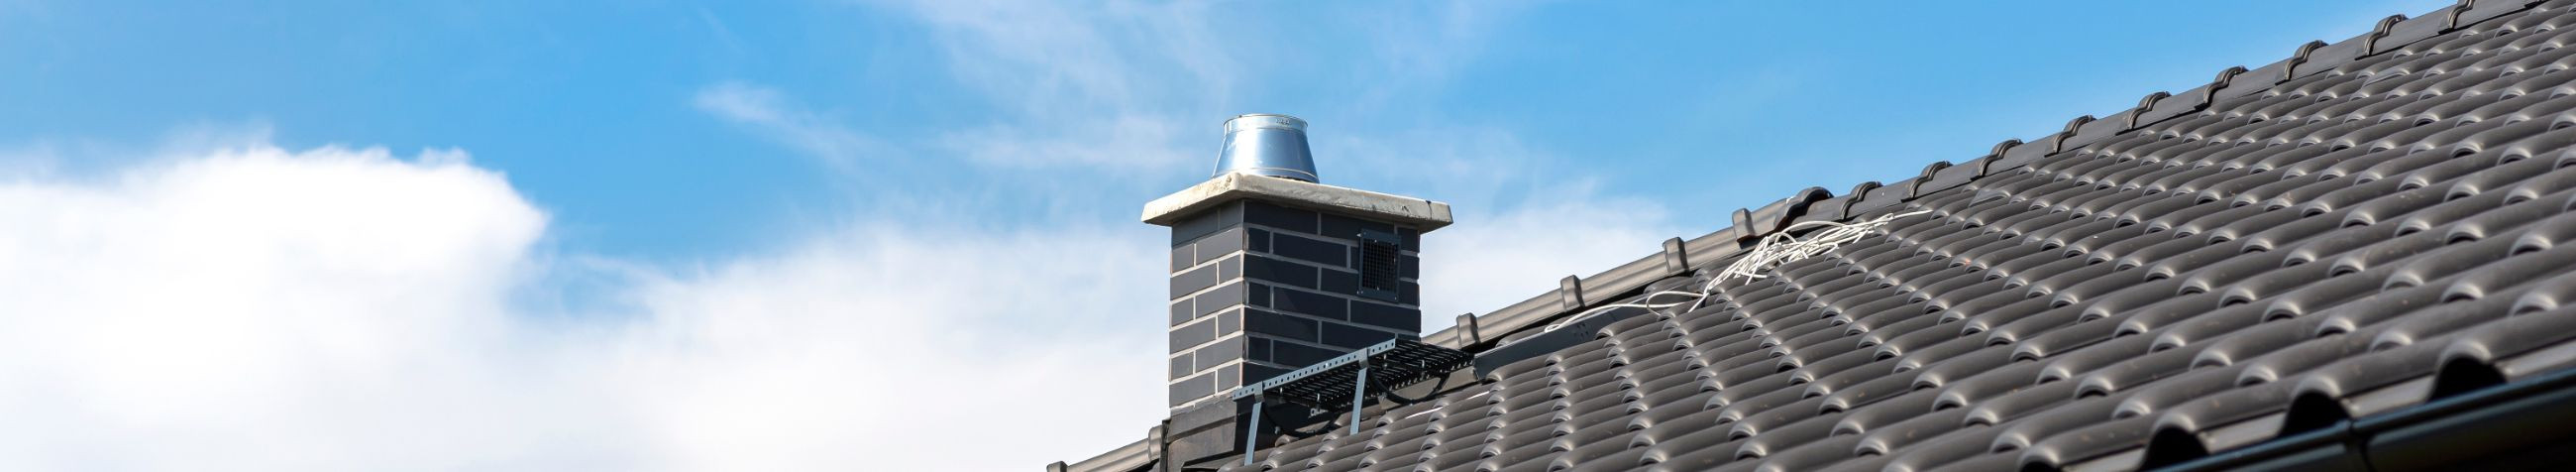 fire safety, construction of chimneys, repair of chimneys, heating systems maintenance, chimney sweep, chimney repair, construction of chimney, Renovation of chimney, safety recommendations, ensuring air exchange